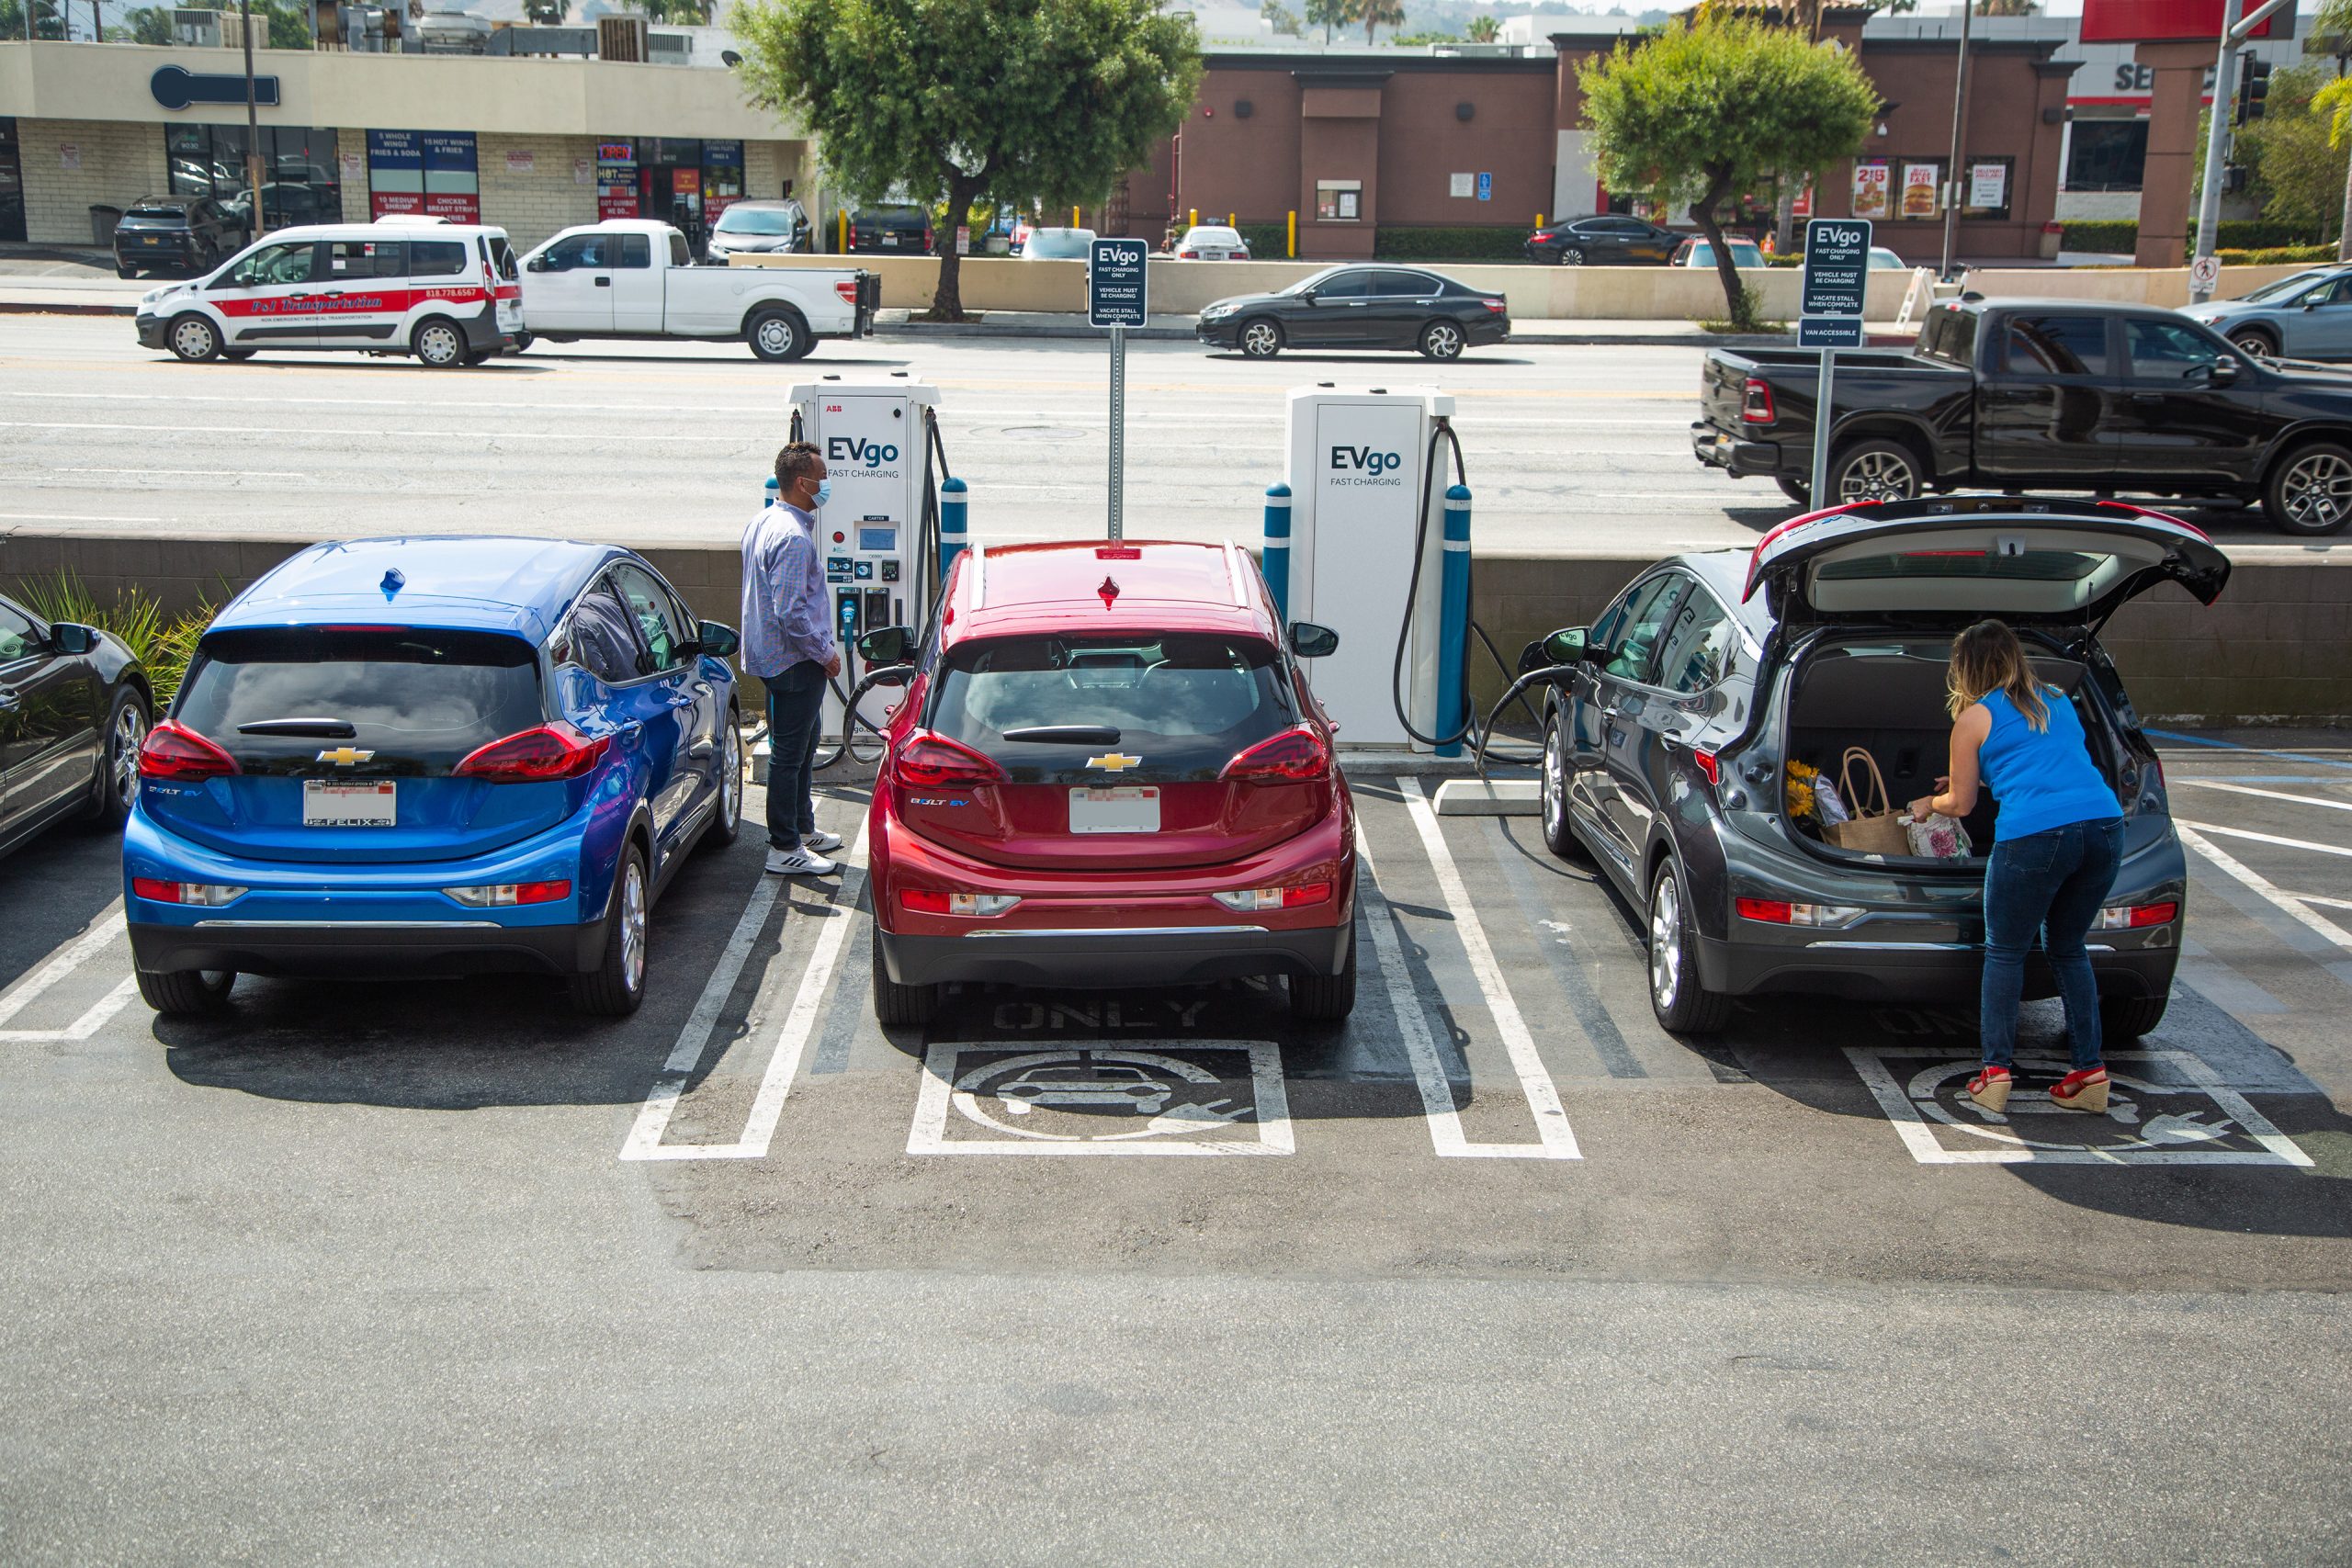 General Motors and EVgo plan to add more than 2,700 fast charger